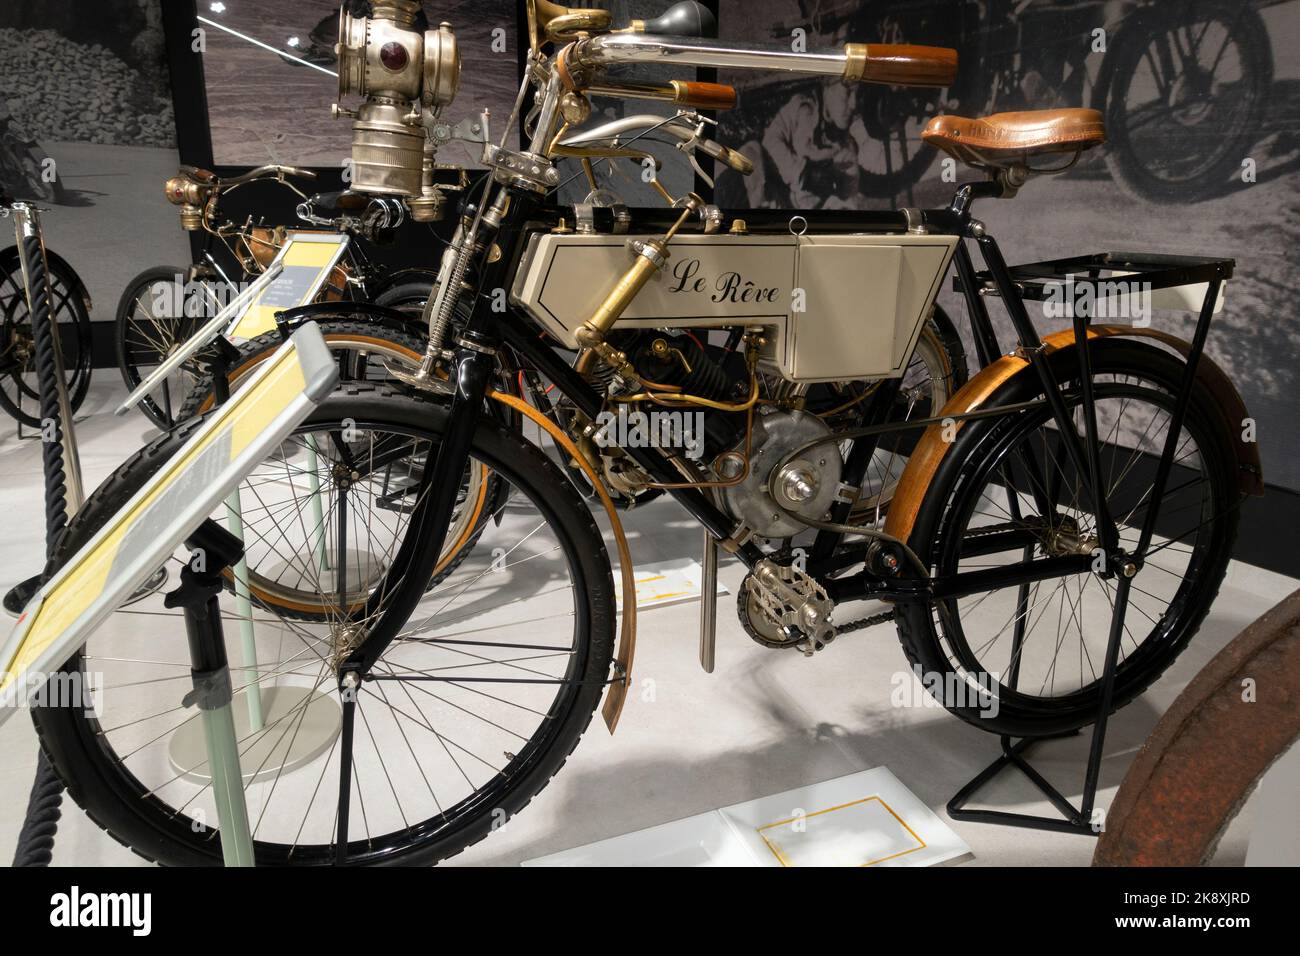 Le Reve motorcycle. model:A . year: 1902. country: France. Motorcycle Museum. Canillo.Andorra Stock Photo